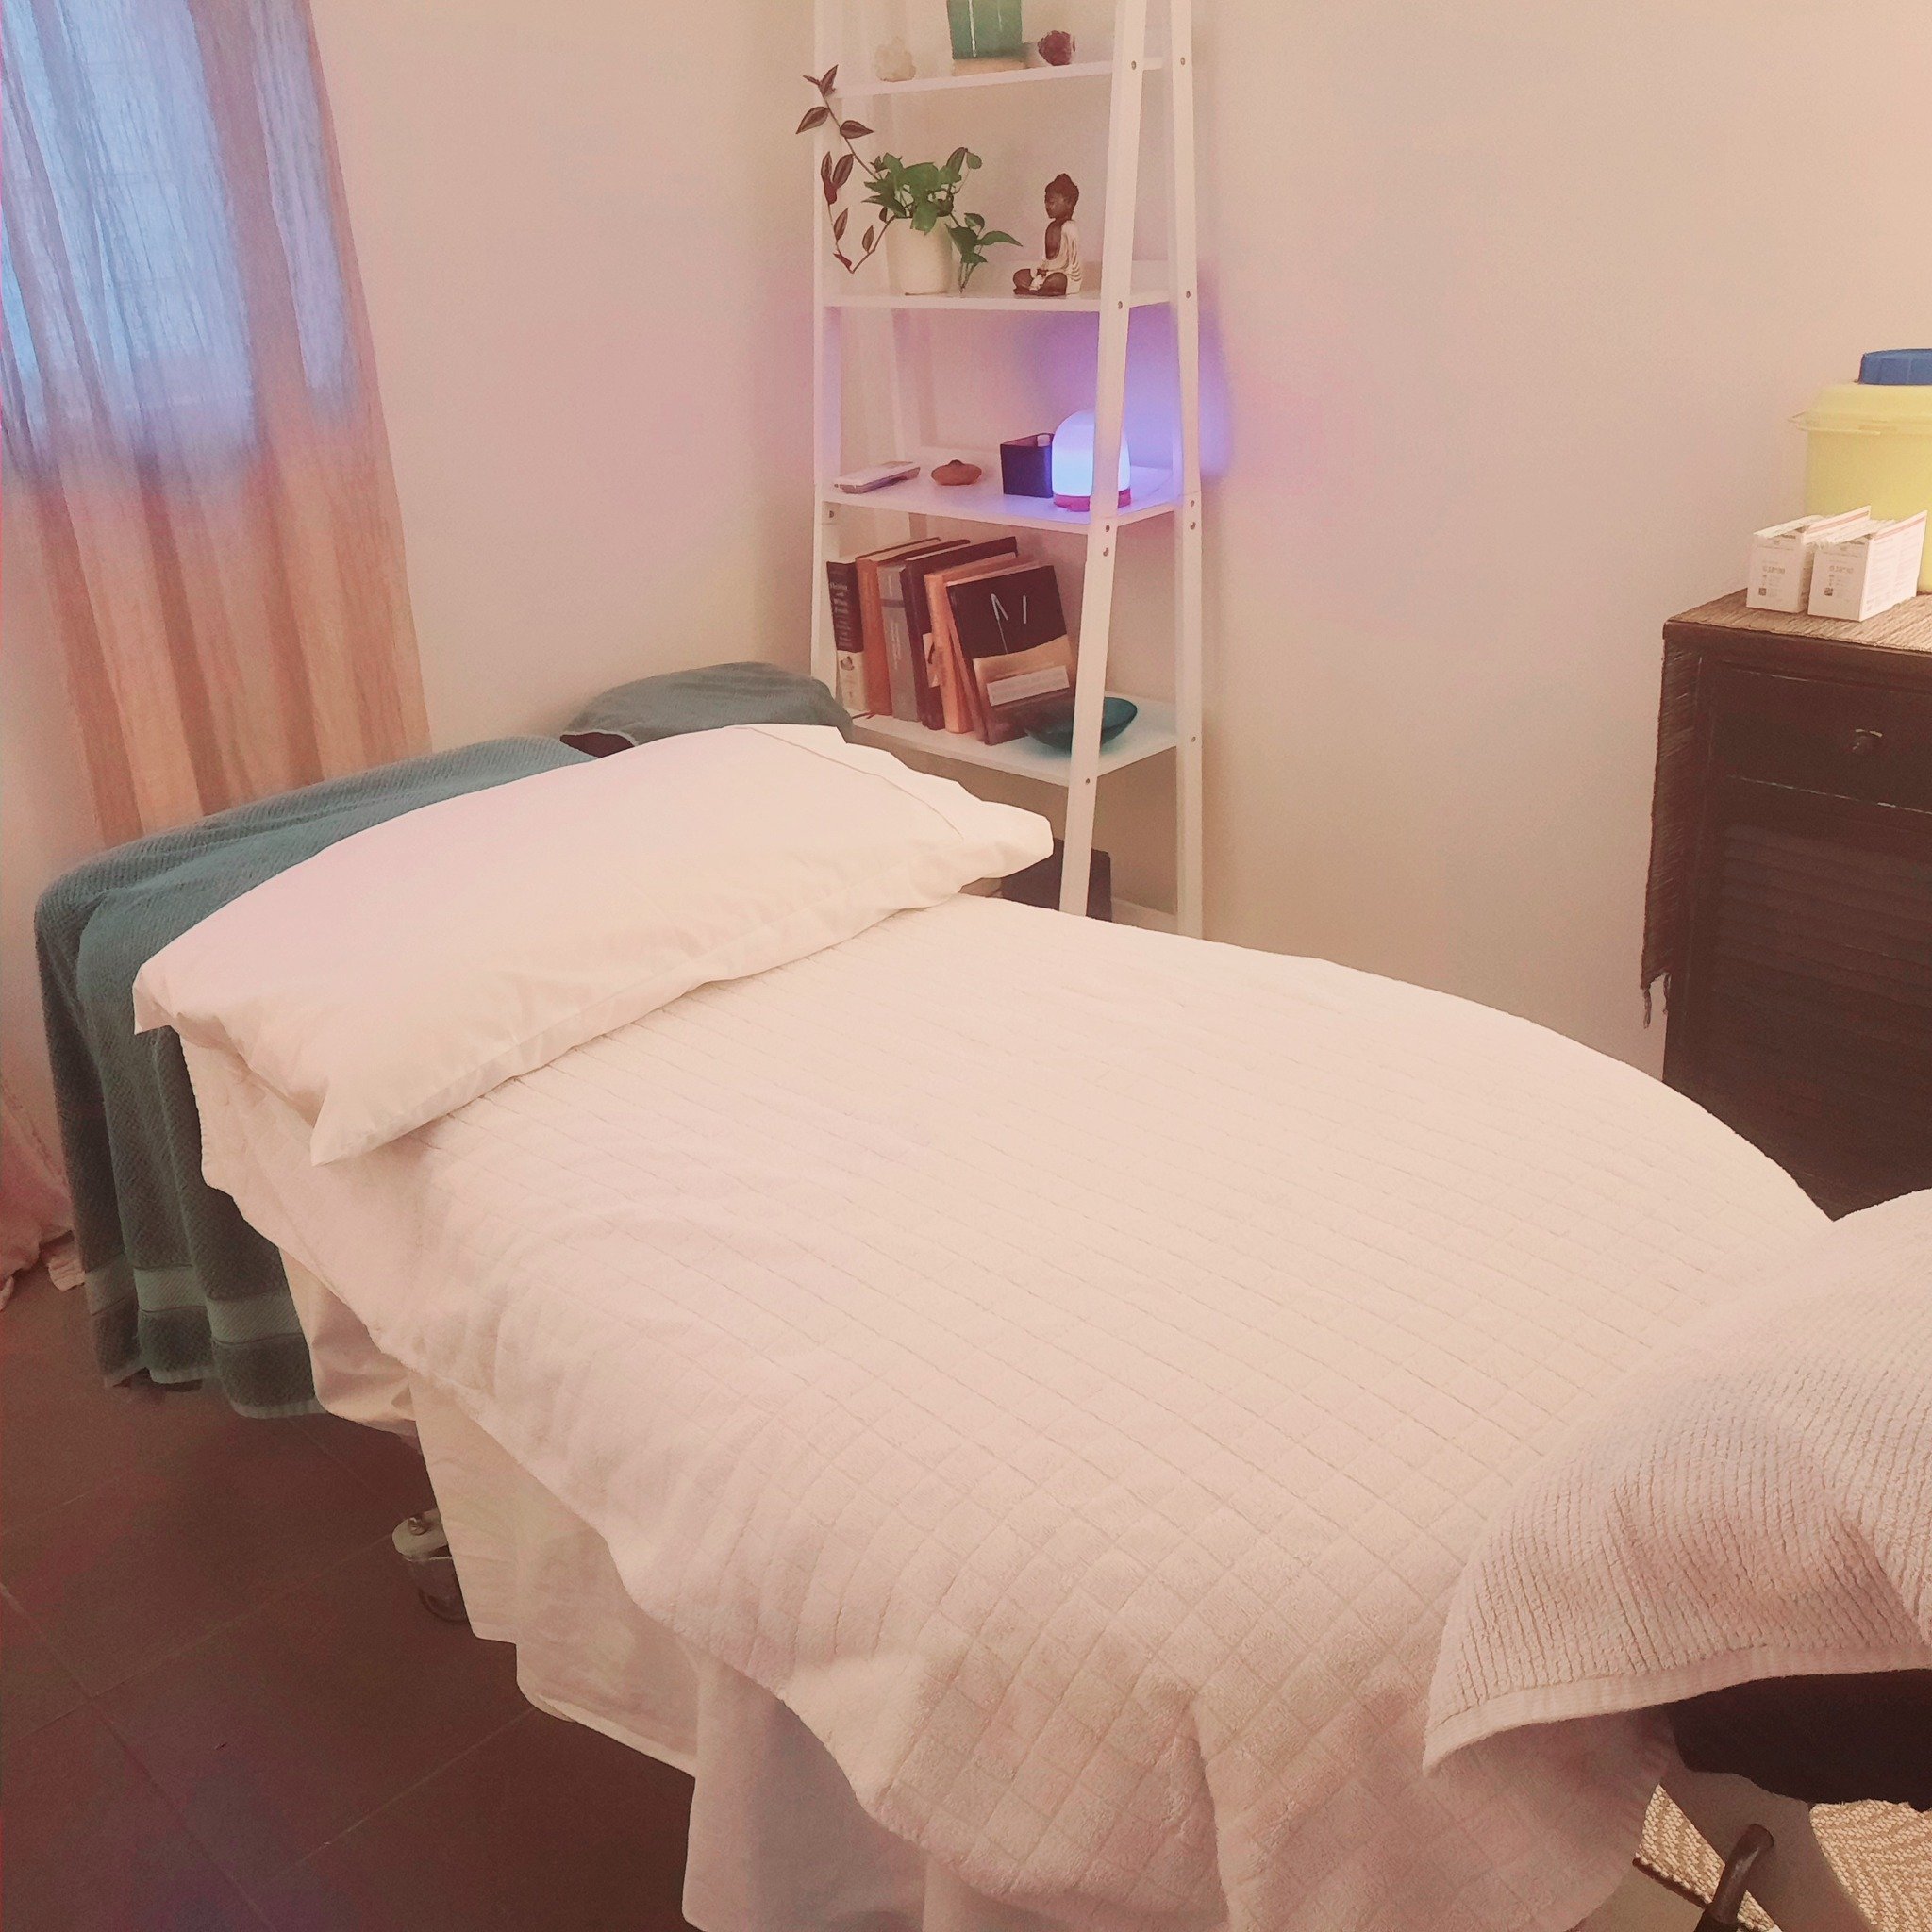 Calm Saturday

Had a relaxing mid-morning experience with Cathy at Yin Studio.  I'm feeling a sense of calm after my beautiful acupuncture session.

The clinic offers a range of services and activities for everyone: acupuncture, cupping, Chinese herb